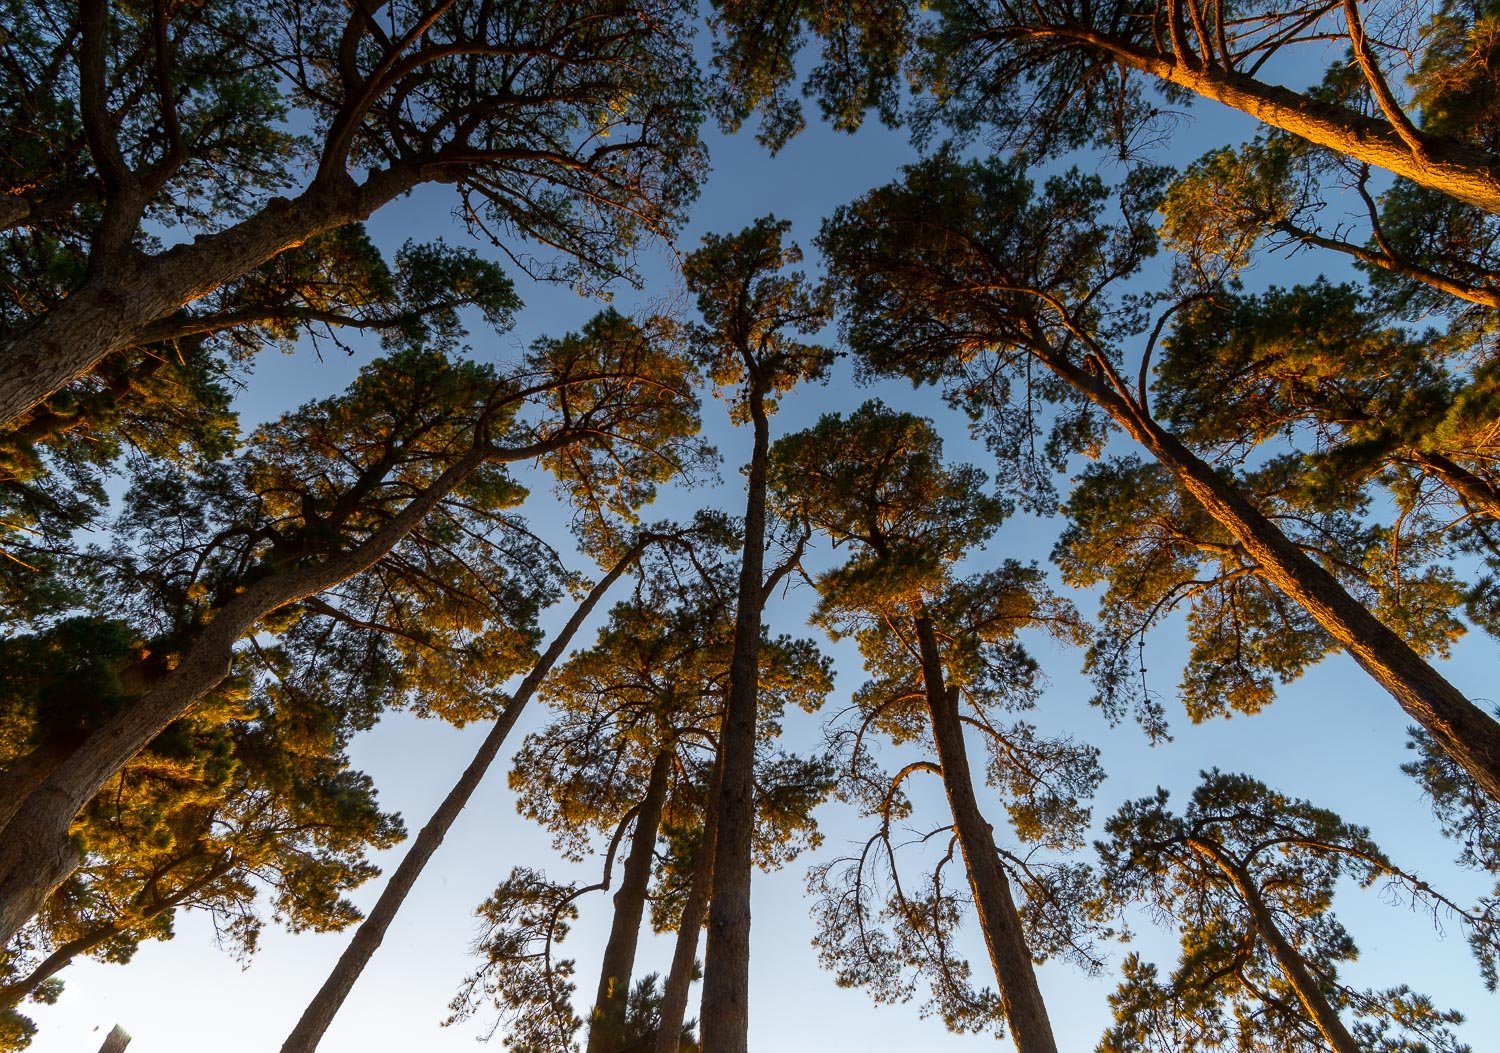 From ground angle shot of a circular group of long-standing trees, Looking Up, Shoreham Pine Forest - Mornington Peninsula VIC